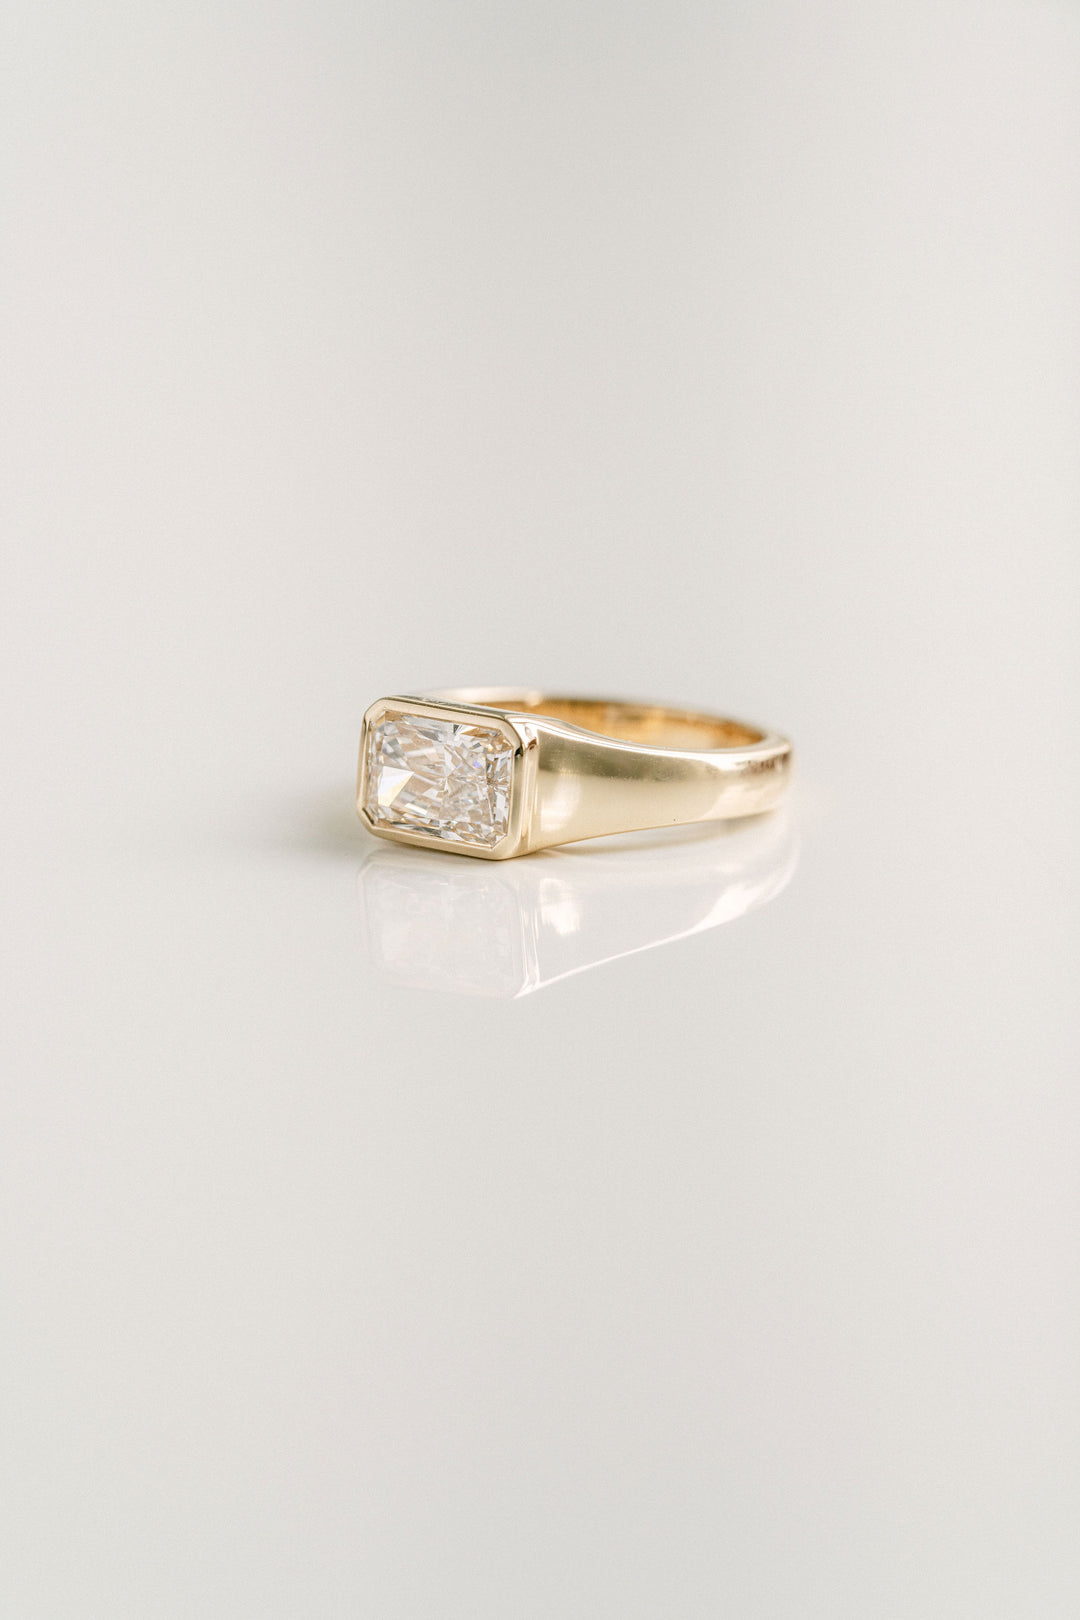 Radiant Cut East-West Signet Ring, 14k Yellow Gold